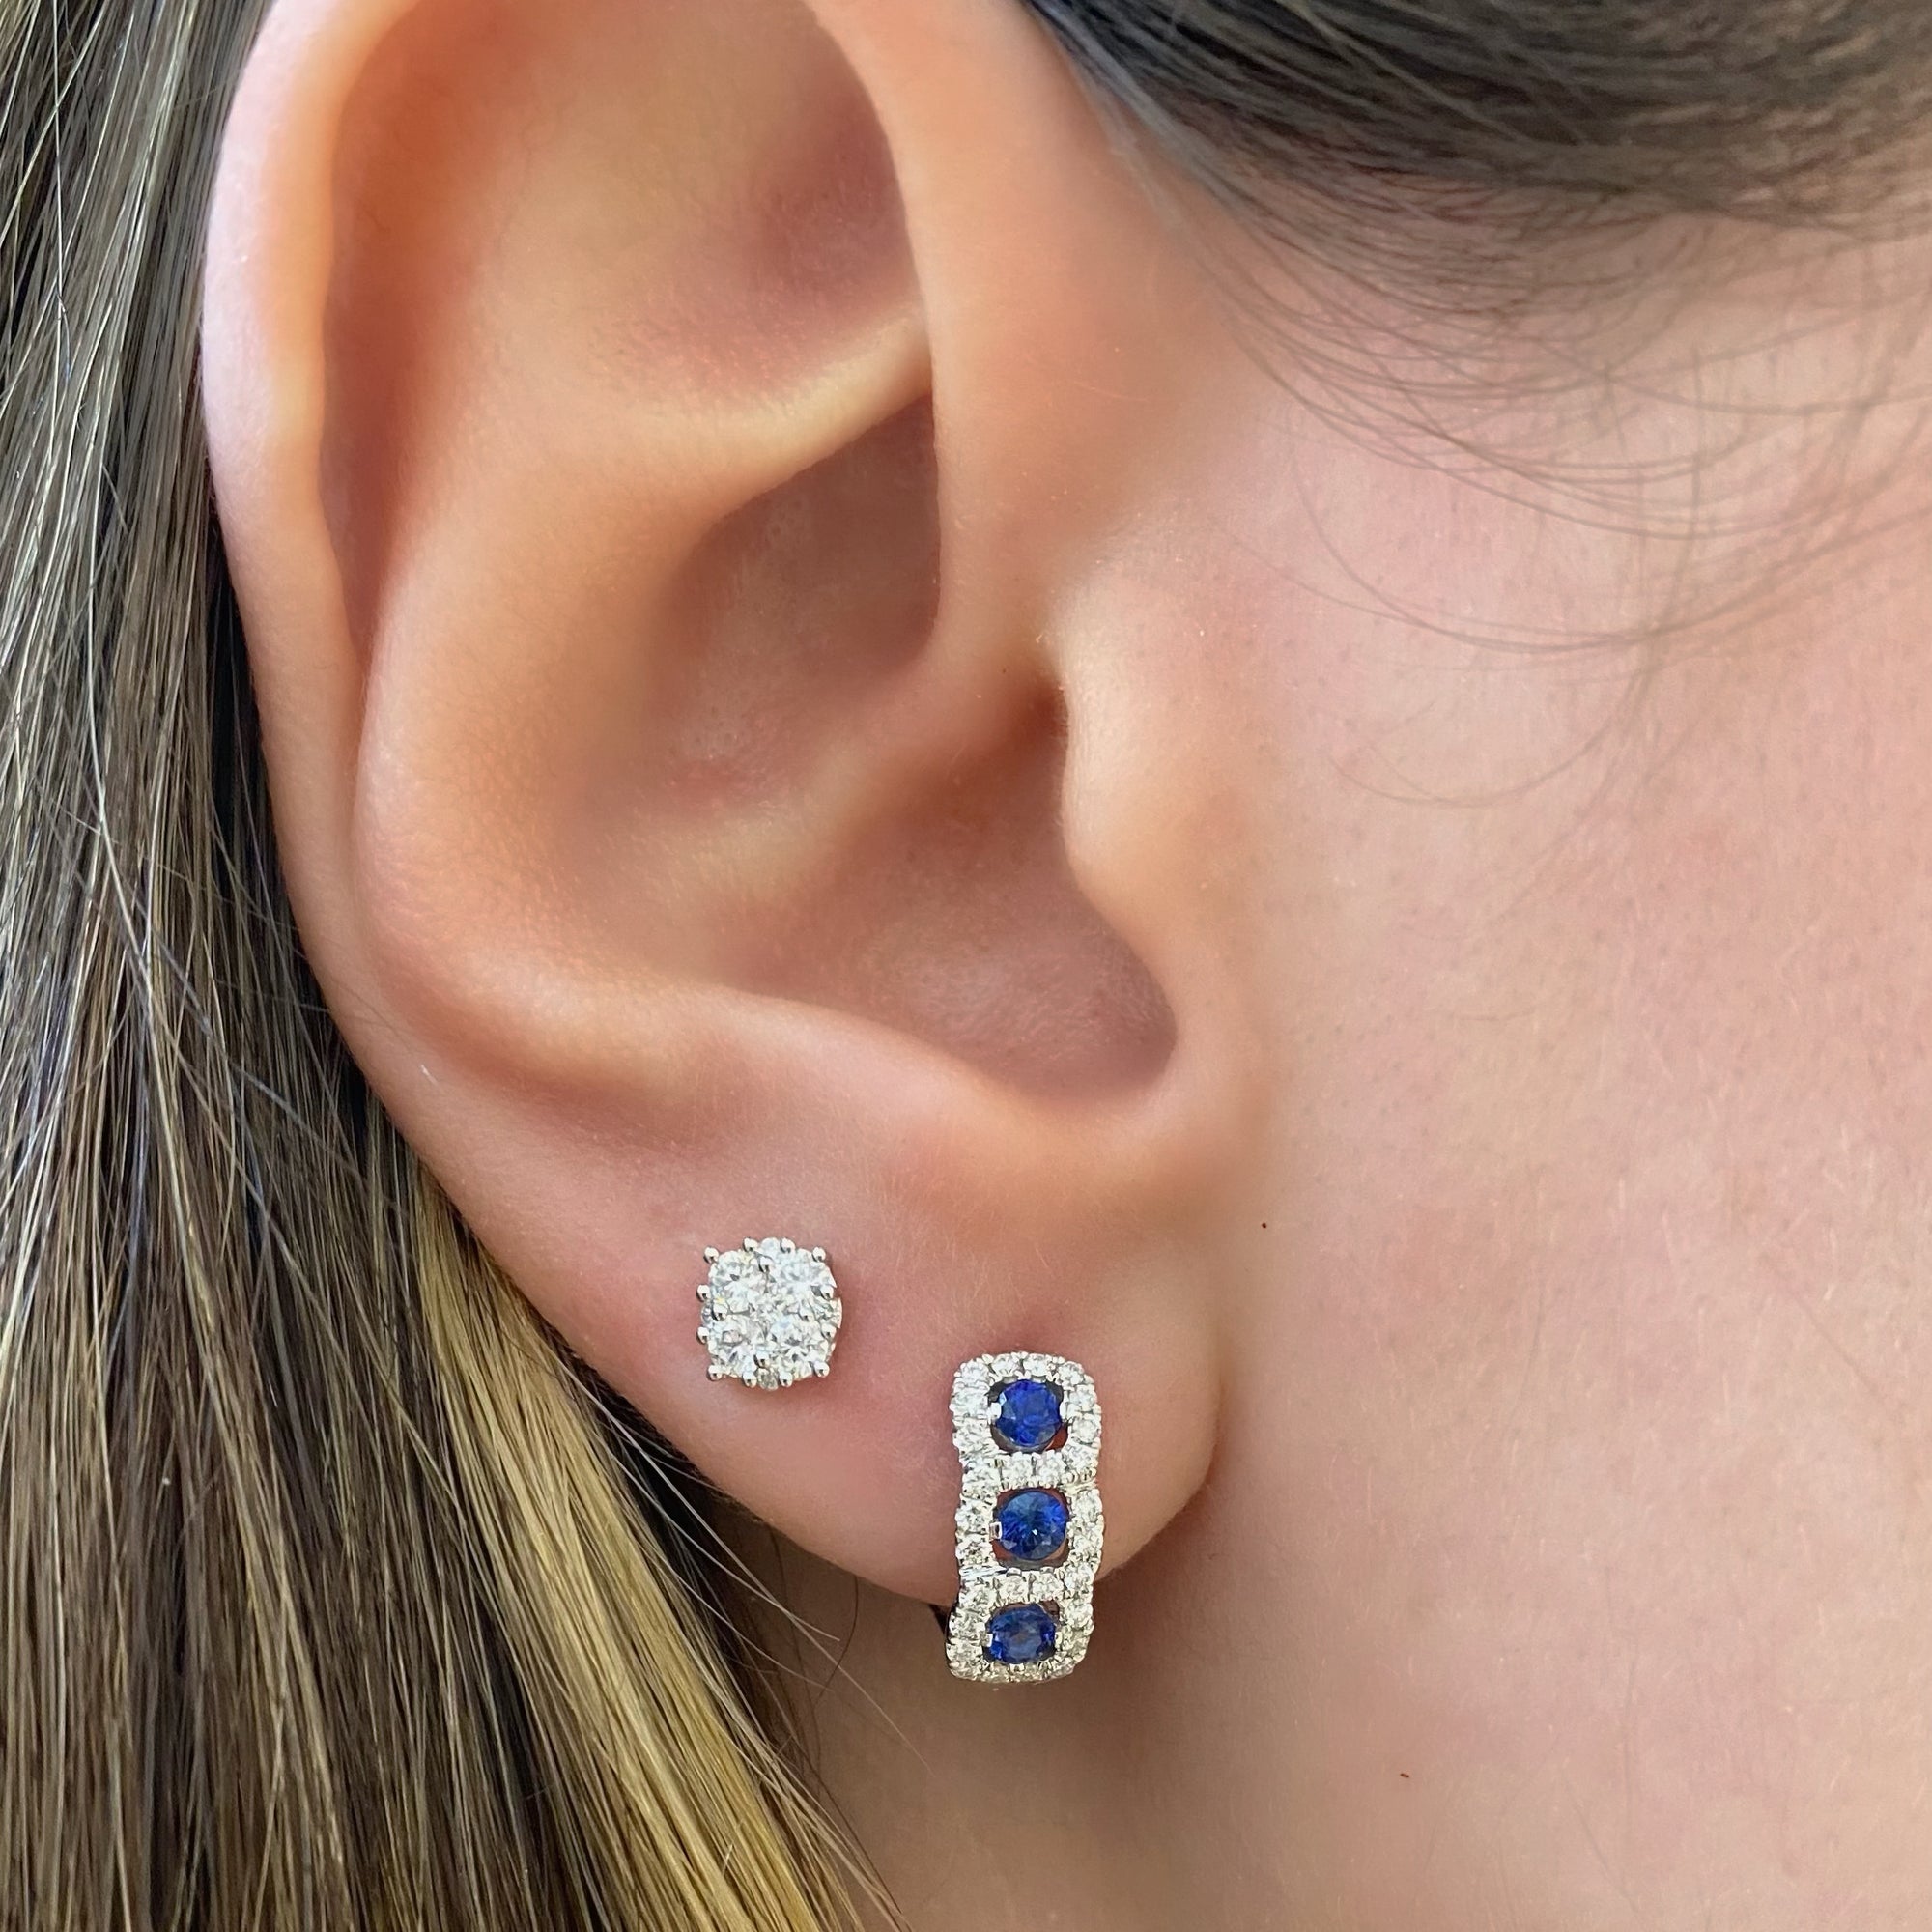 Sapphire & Diamond huggie earrings - 18K gold weighing 4.04 grams  - 56 round diamonds totaling 0.30 carats  - 6 sapphires totaling 0.50 carats